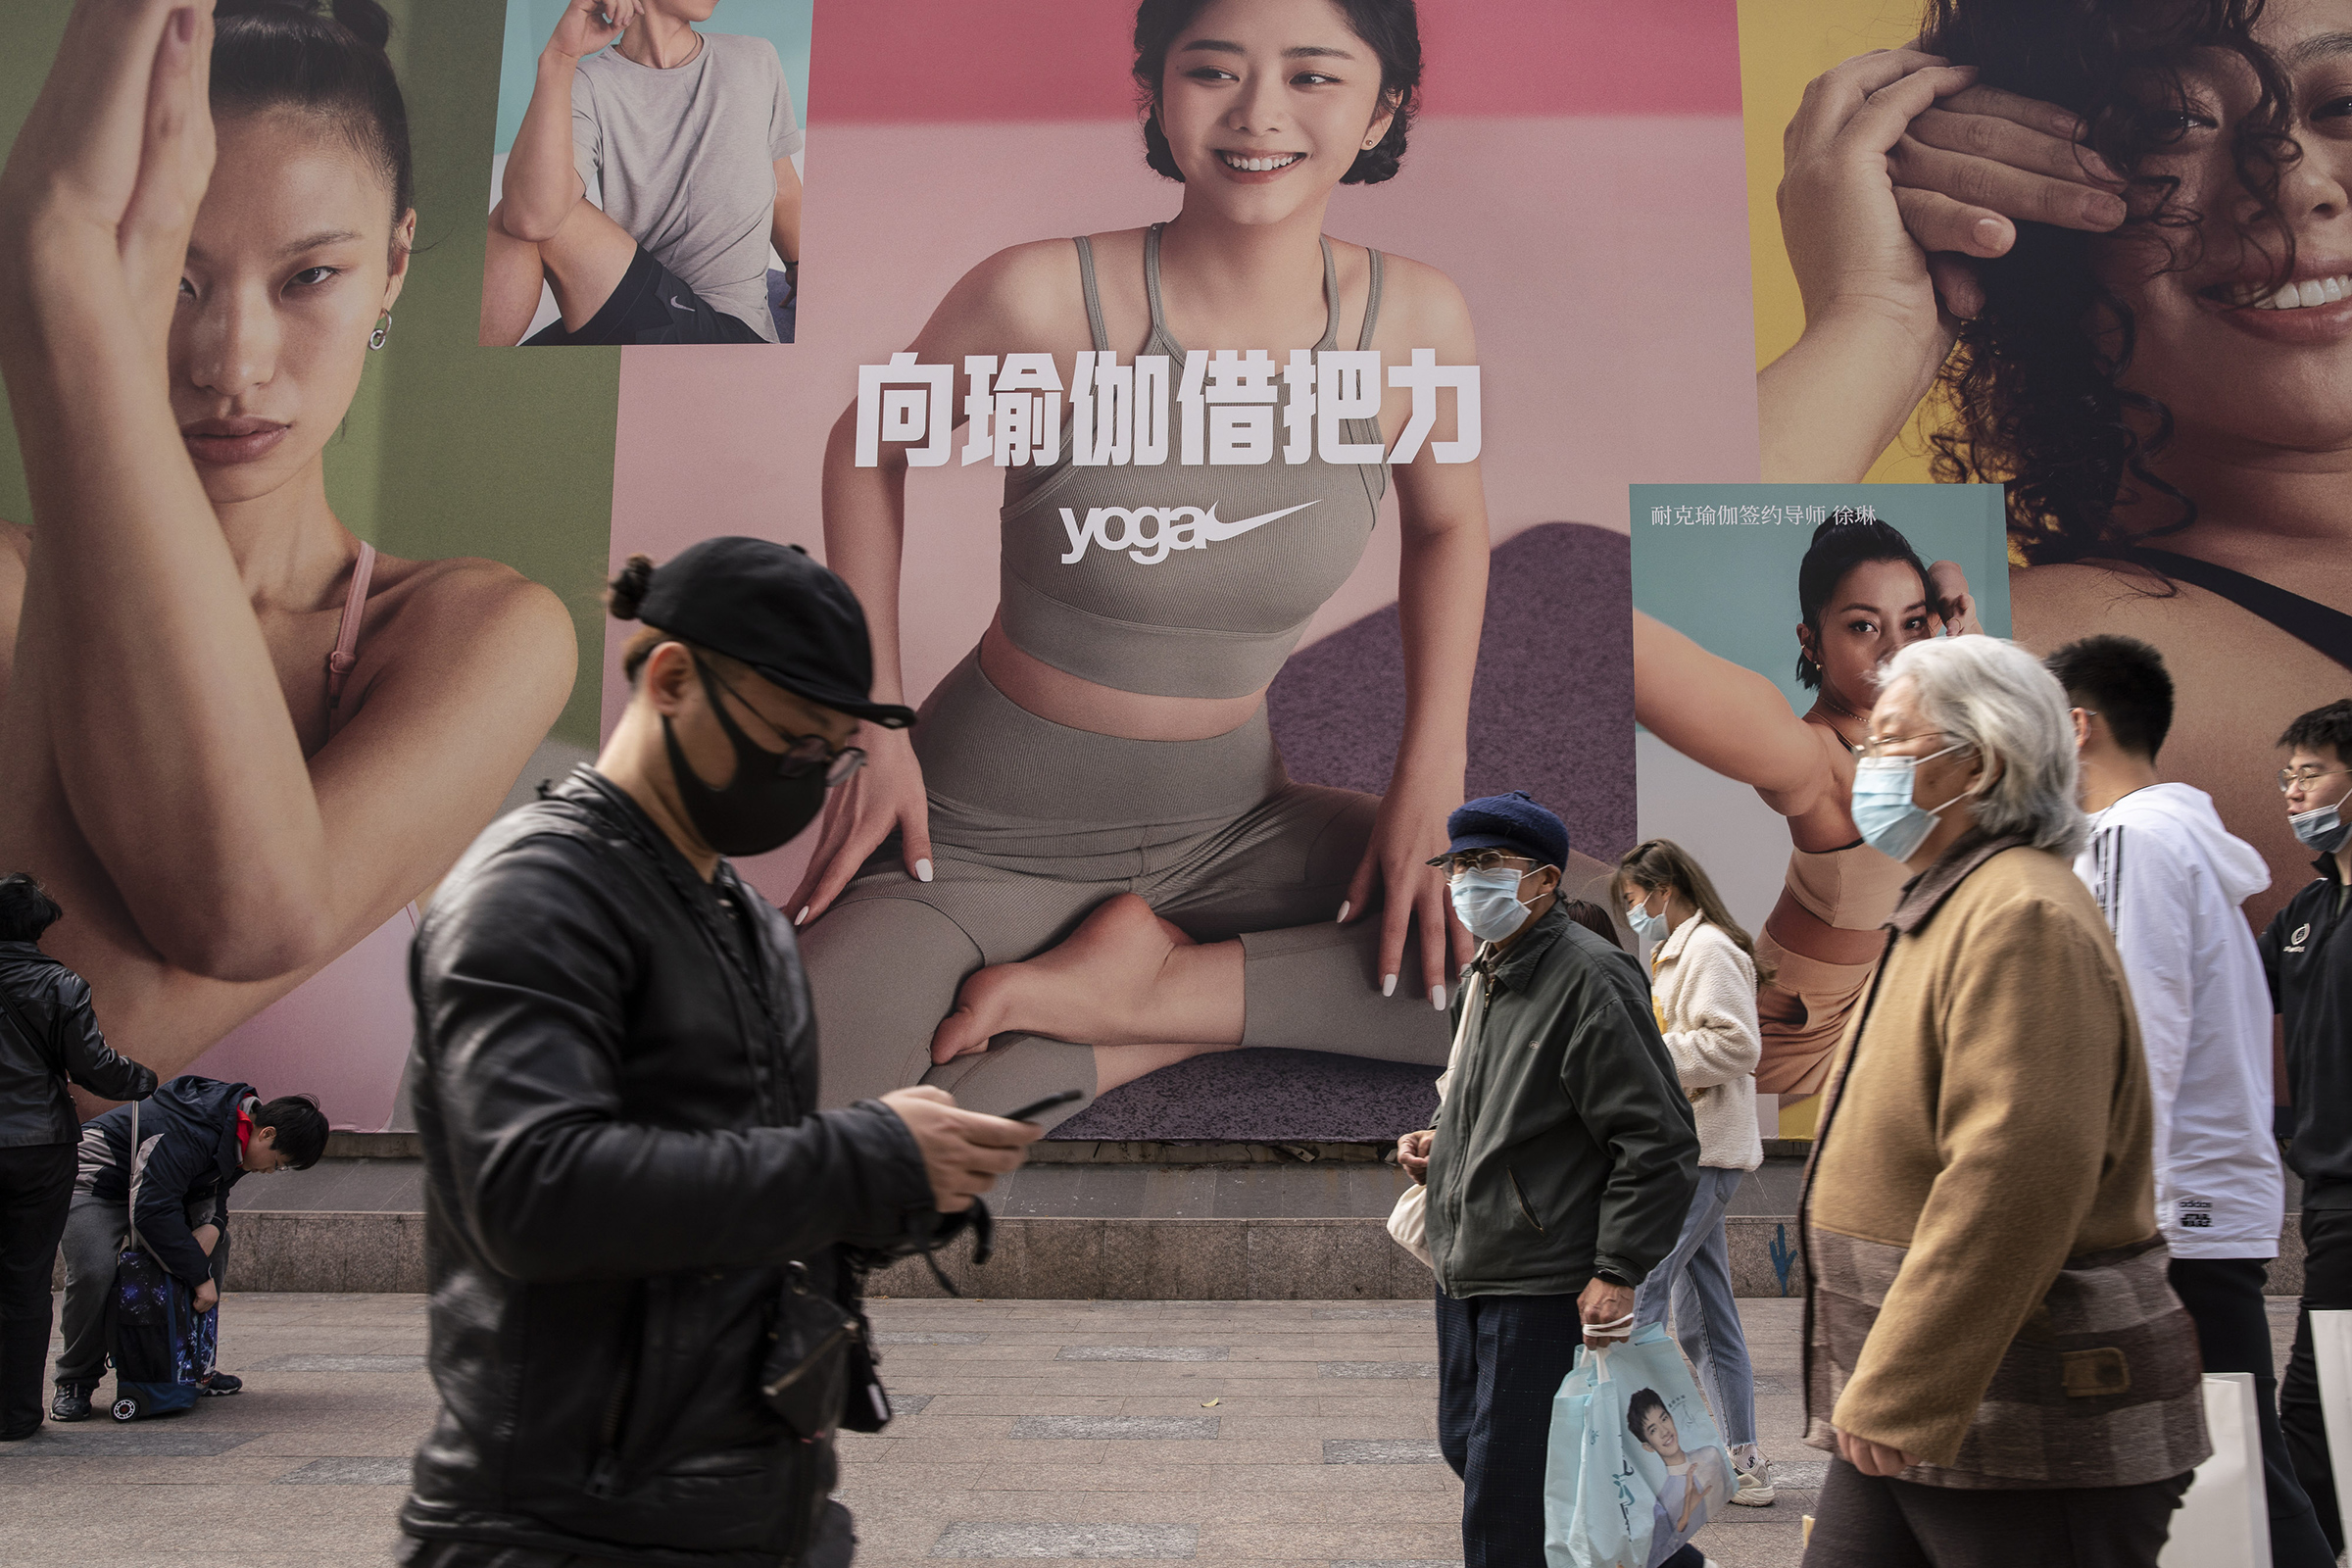 Pedestrians walk past a Nike yoga advertisement in Shanghai on March 26. China this week has pushed a campaign to boycott Western retailers after the U.S., U.K., Canada and the E.U. imposed sanctions over human-rights abuses against ethnic minority Uyghurs in Xinjiang.